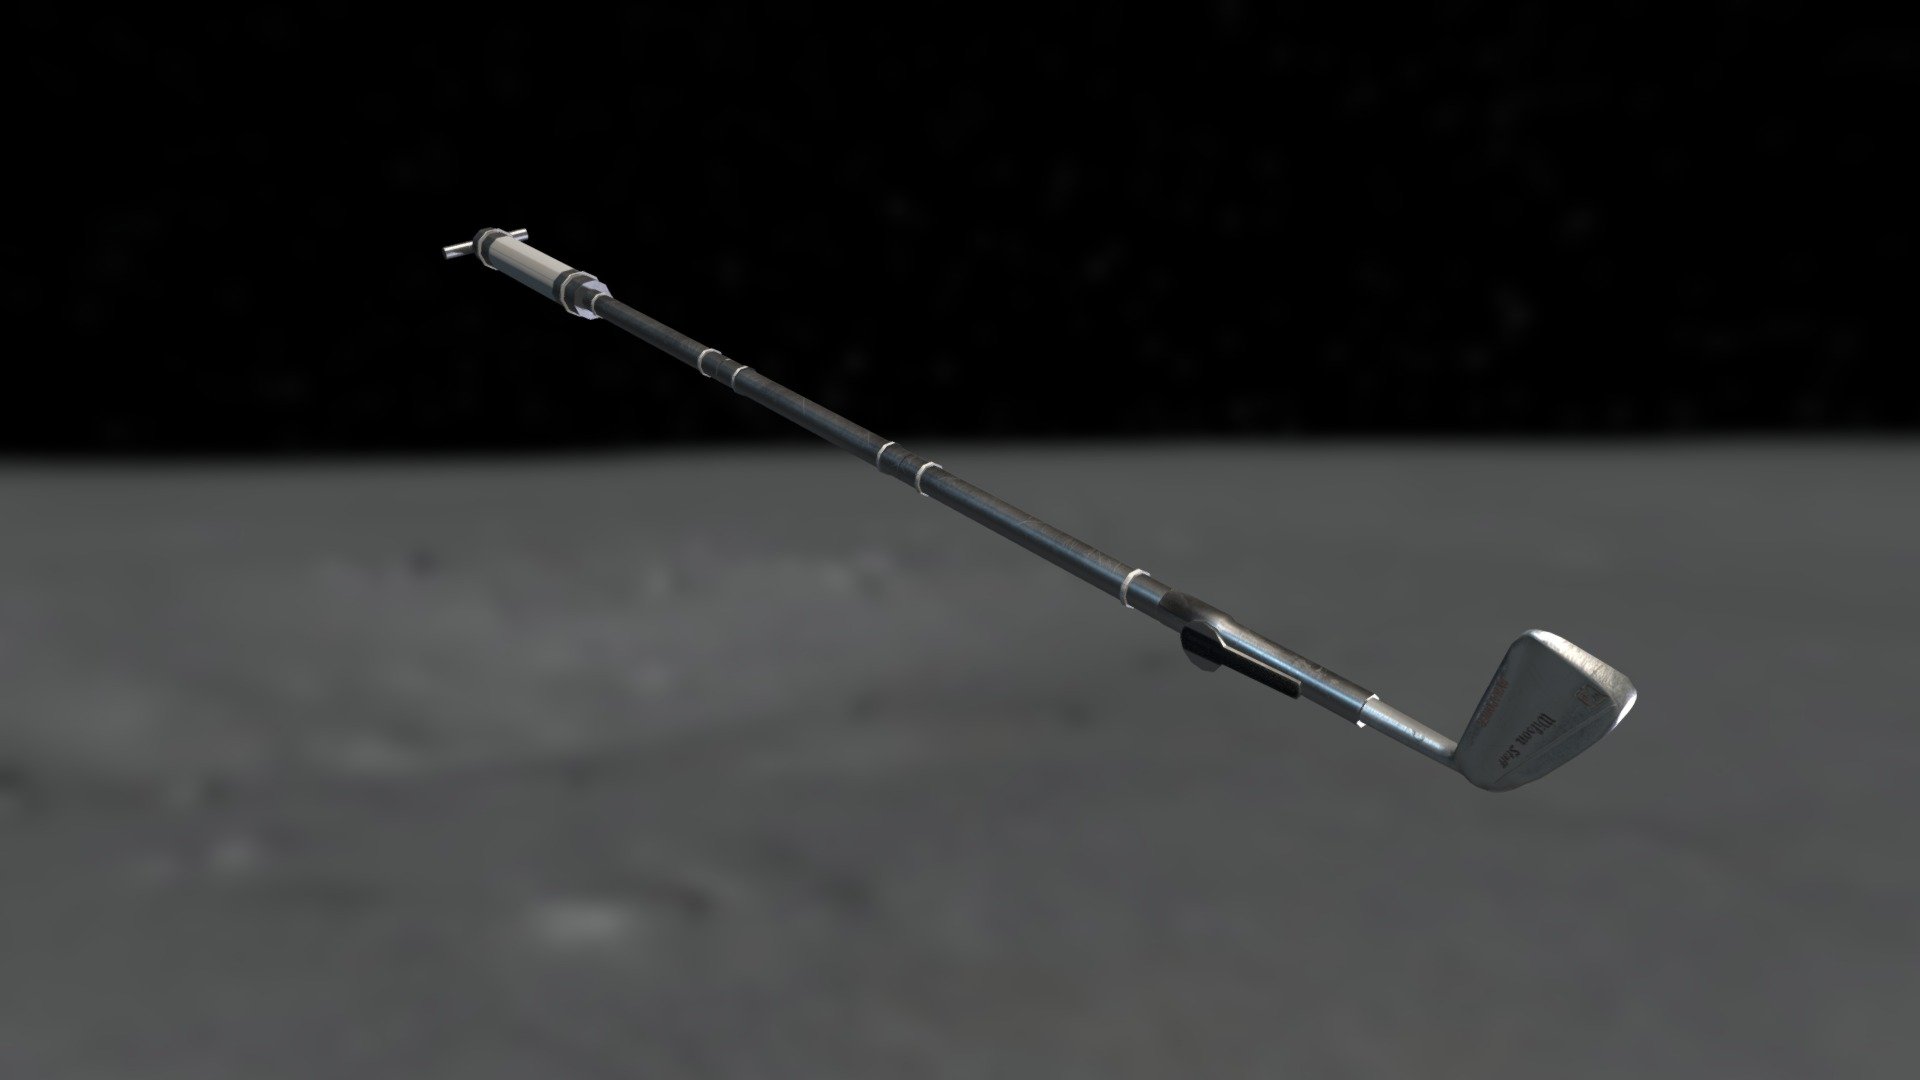 See Arc/k Catalog Page - https://collections.arck-project.org/view/ARCK3D0000000701

On Feb. 6, 1971, Apollo 14 astronaut Alan Shepard became the first person to play golf on the moon. He smuggled a makeshift golf club head onto the spacecraft inside a sock. The first ball he hit veered into a nearby crater, but with a solid second swing, the next ball soared for &ldquo;miles and miles and miles